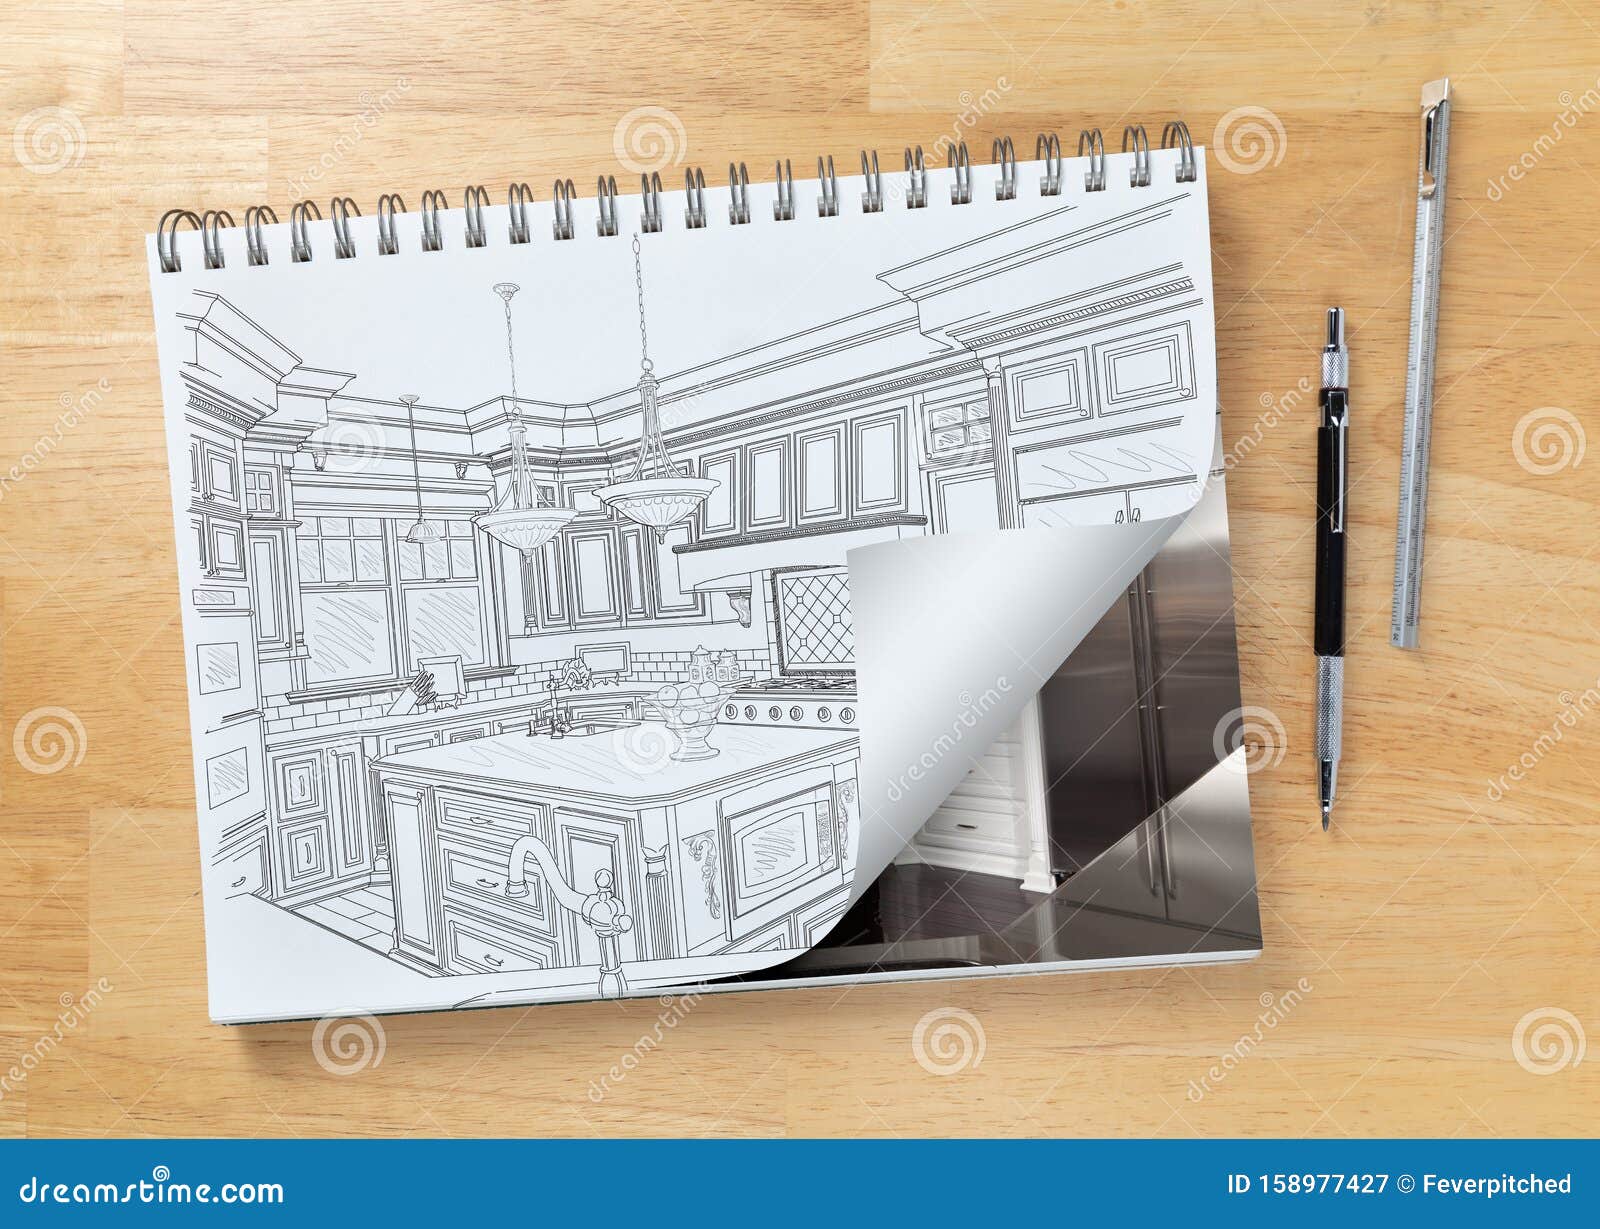 Sketch Pad On Desk With Drawing Of Kitchen And Page Turning To